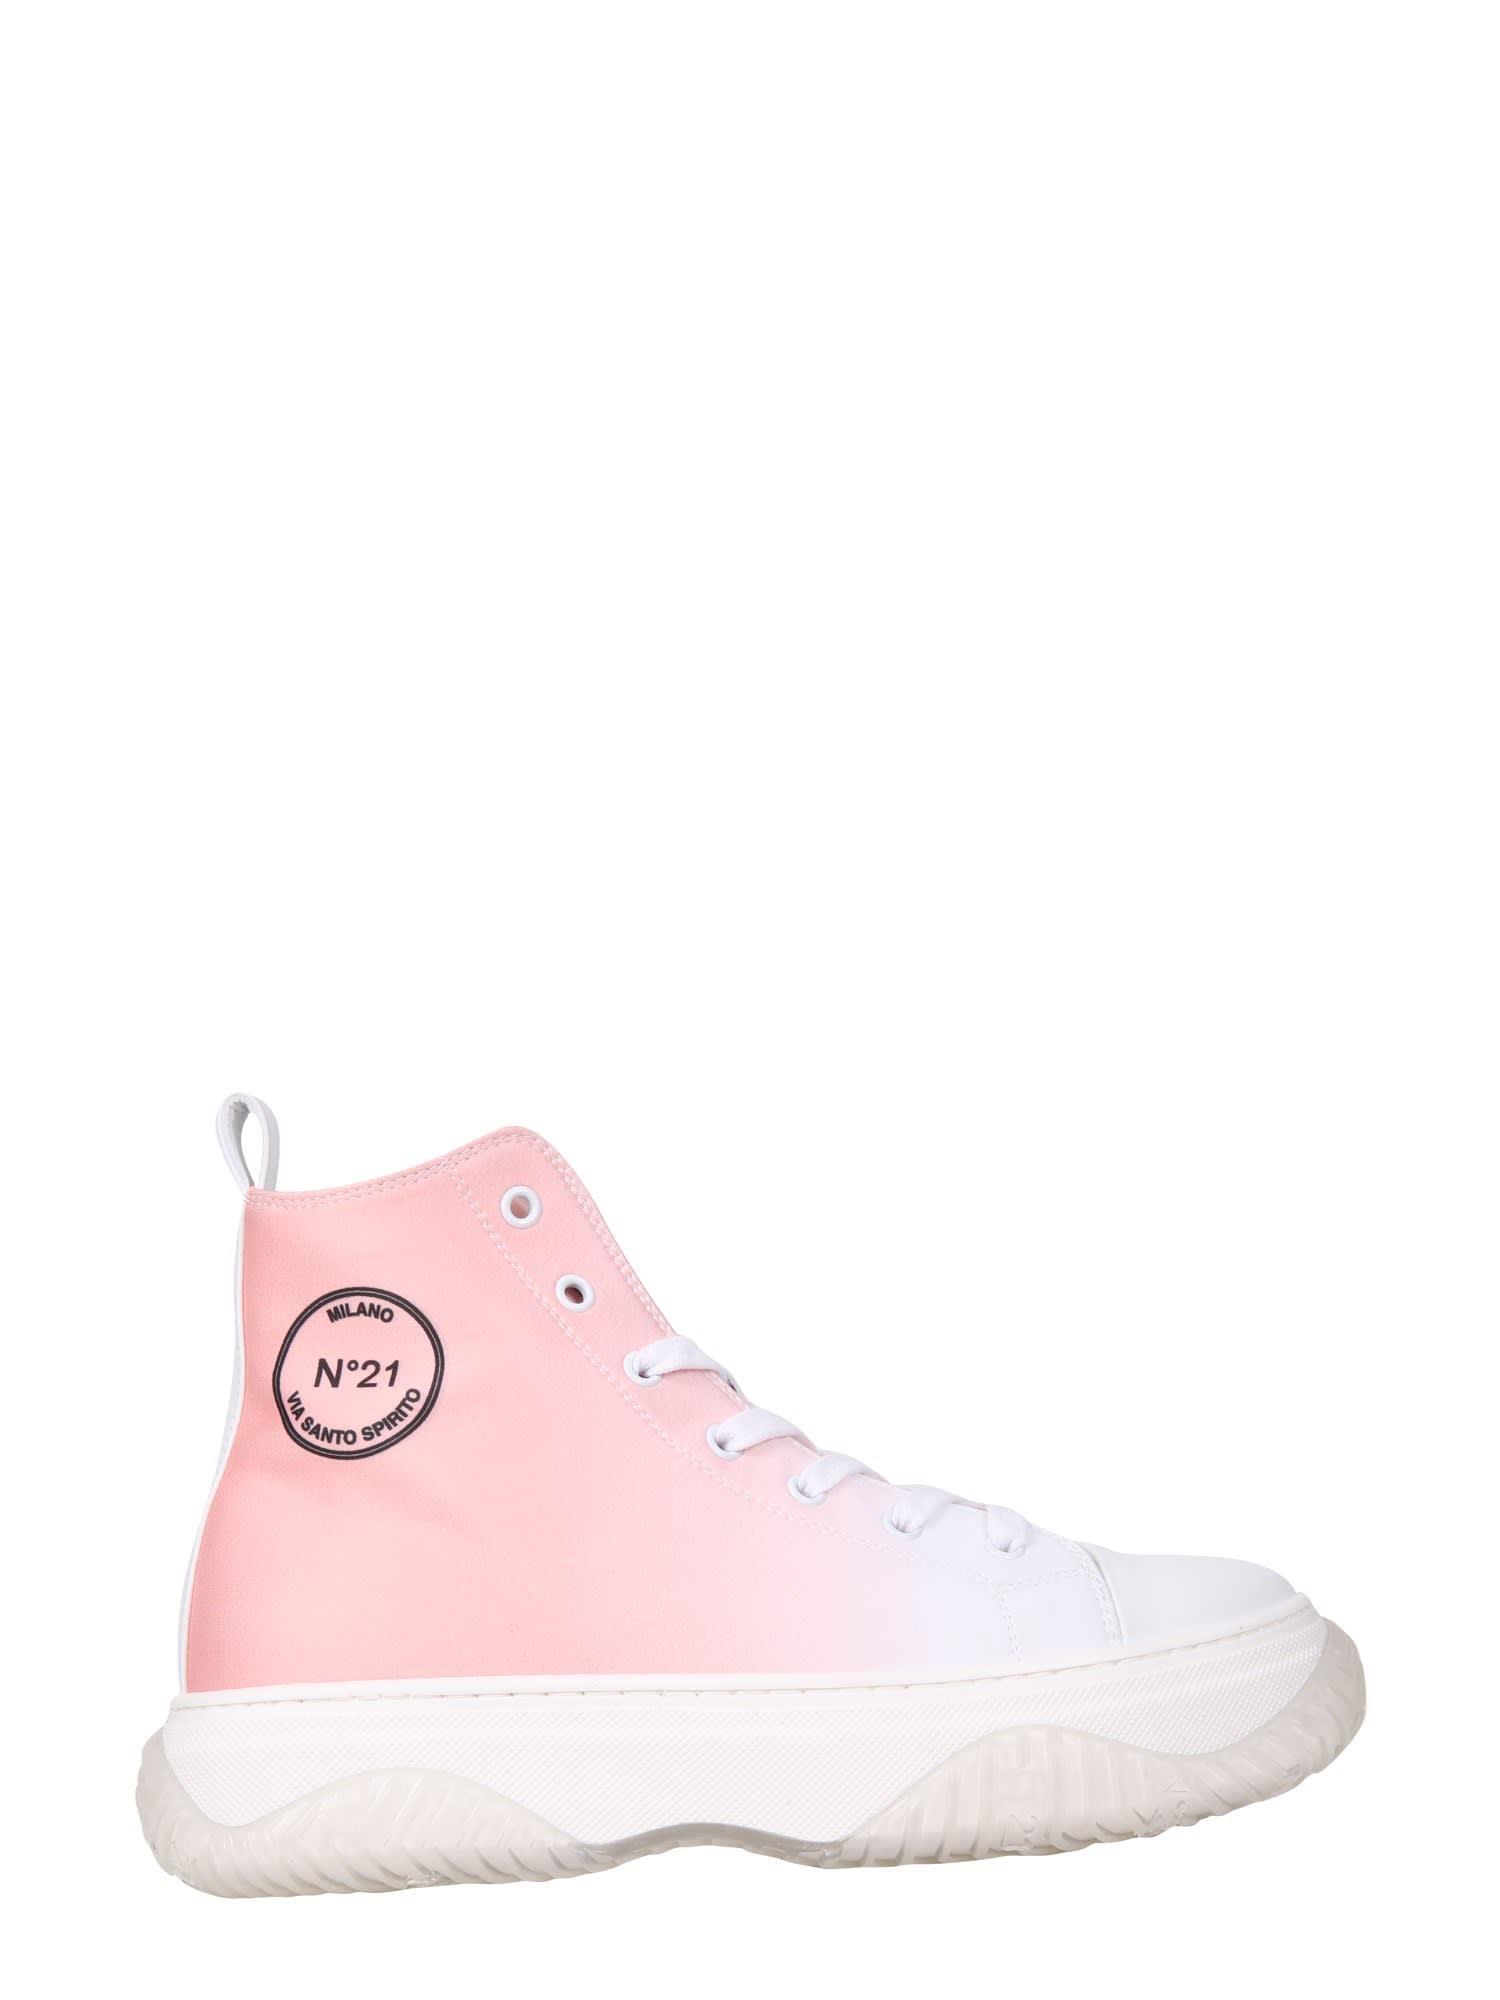 Buy N.21 High Bonnie Sneakers online, shop N.21 shoes with free shipping